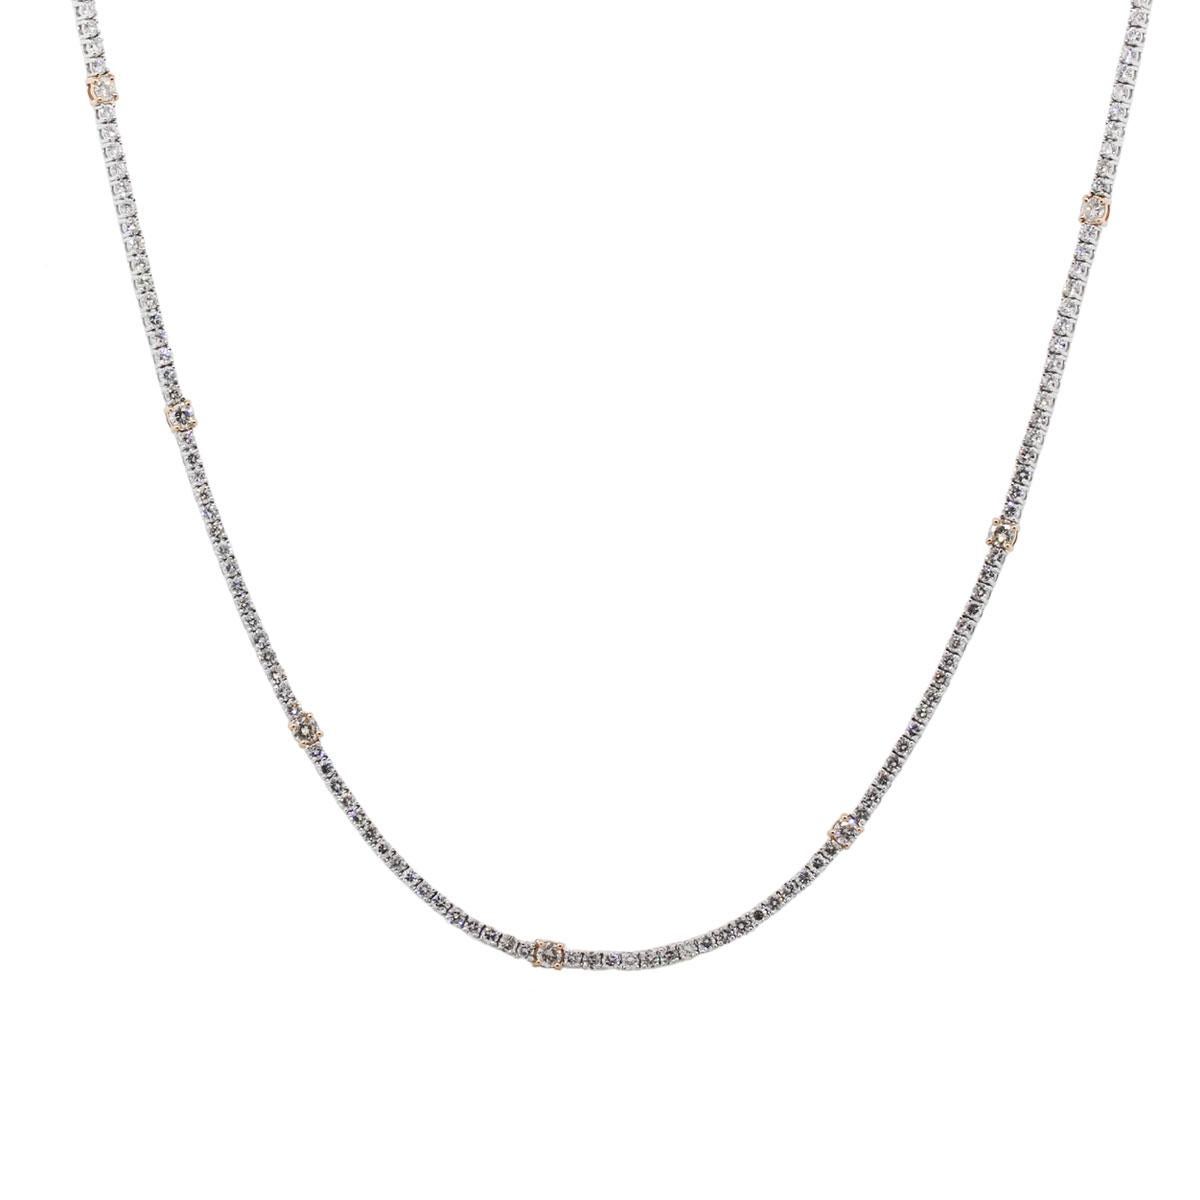 Material: 14k white and rose gold
Diamond Details: Approximately 6ctw of round brilliant diamonds, DIamonds are H/I in color, SI-I in clarity
Measurements: Necklace measures 20″
Fastening: Tongue in box clasp with safety latch
Item Weight: 17.1g